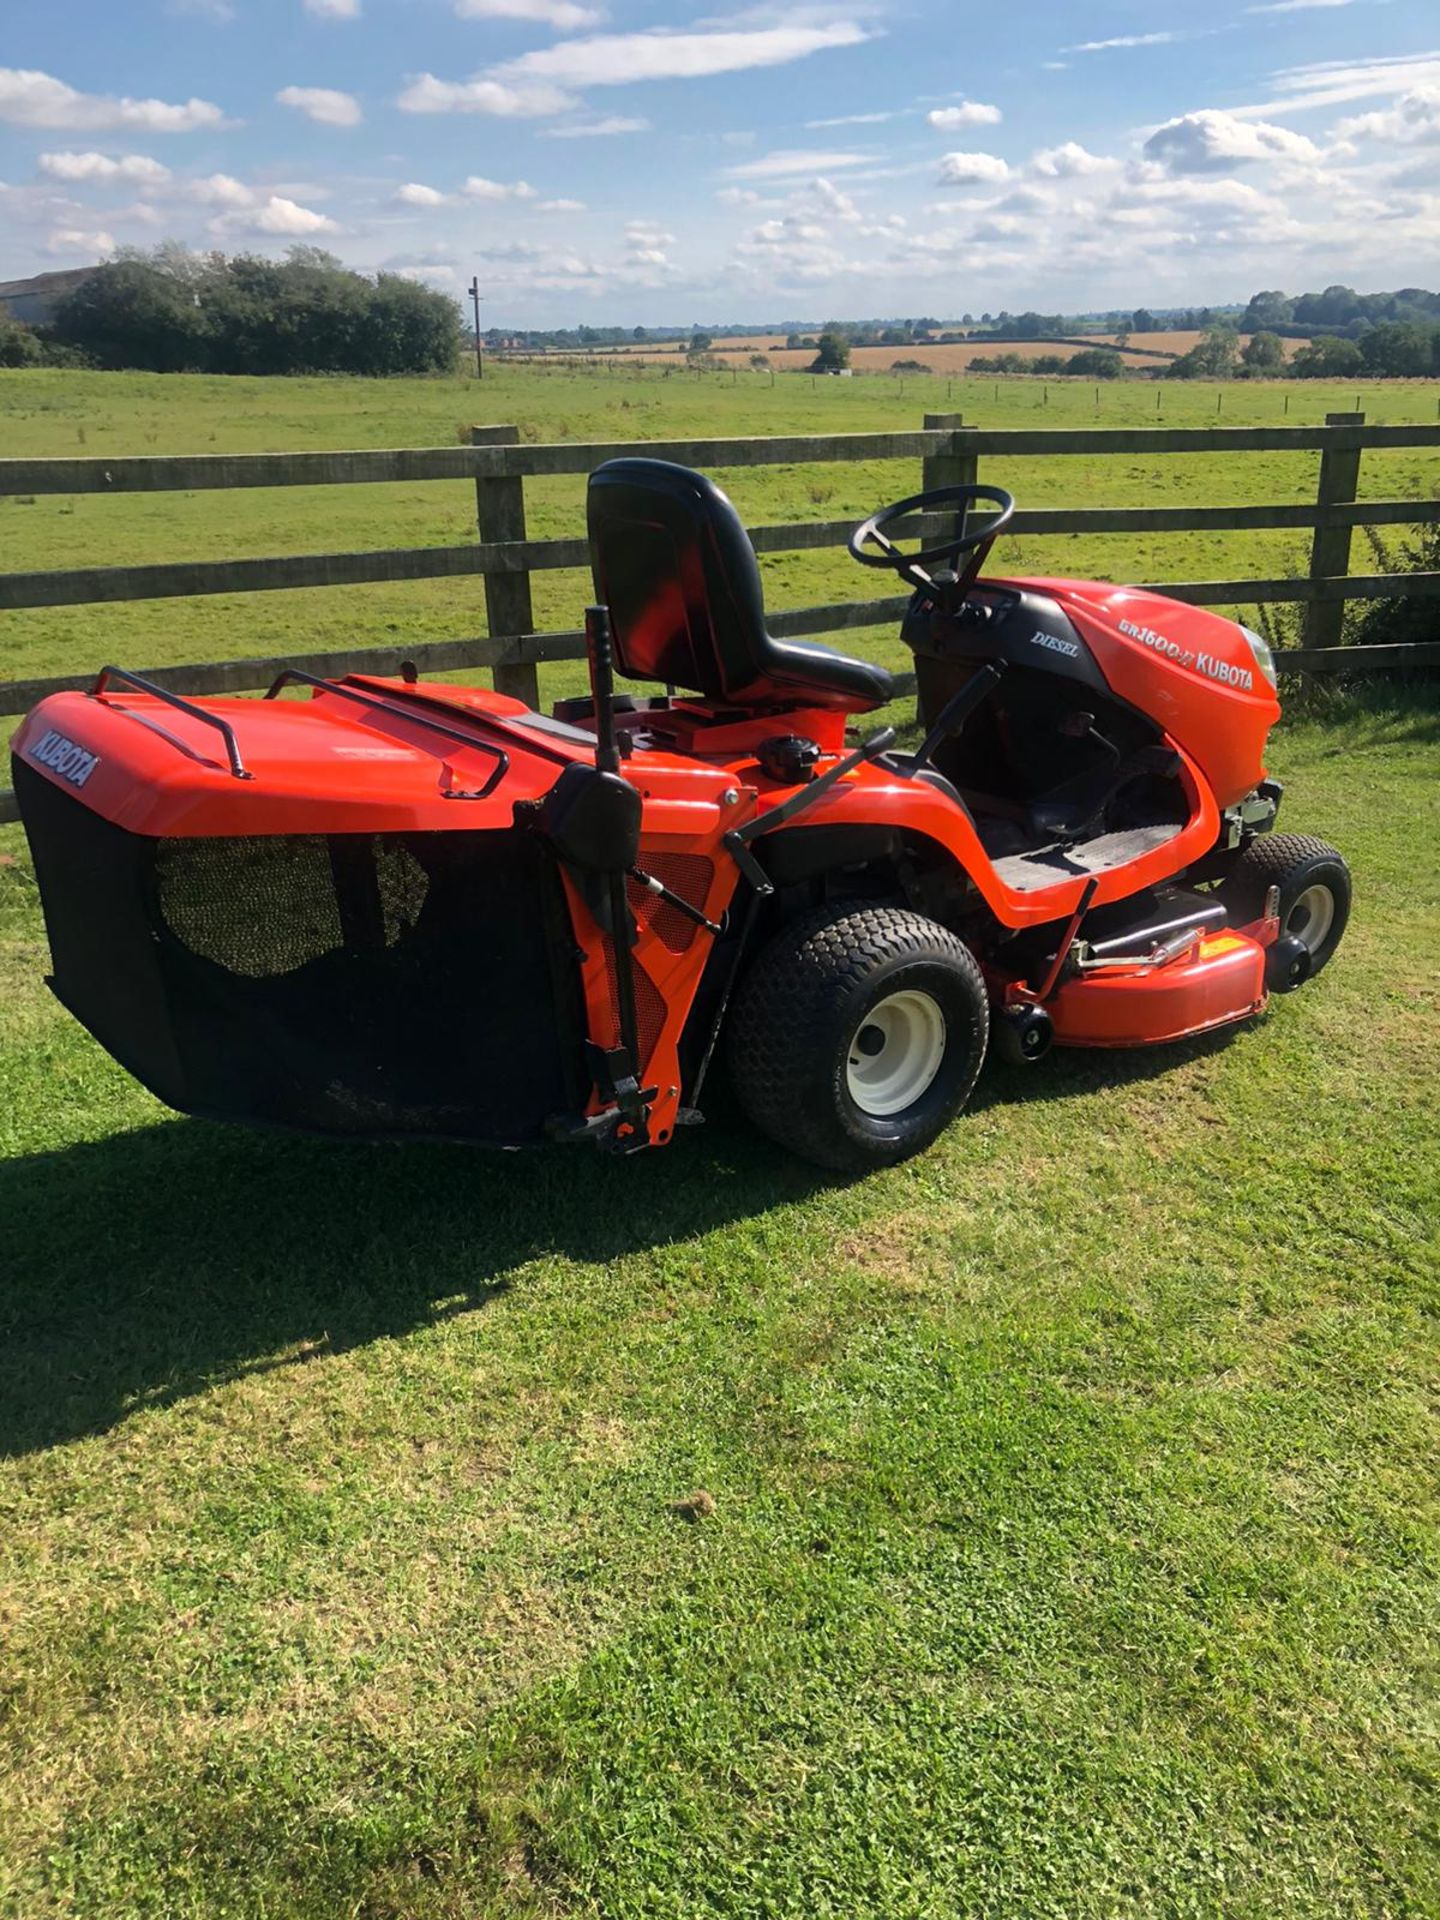 KUBOTA GR1600-II DIESEL RIDE ON LAWN MOWER, RUNS, DRIVES AND CUTS, EX DEMO CONDITION, ONLY 66 HOURS! - Image 4 of 4